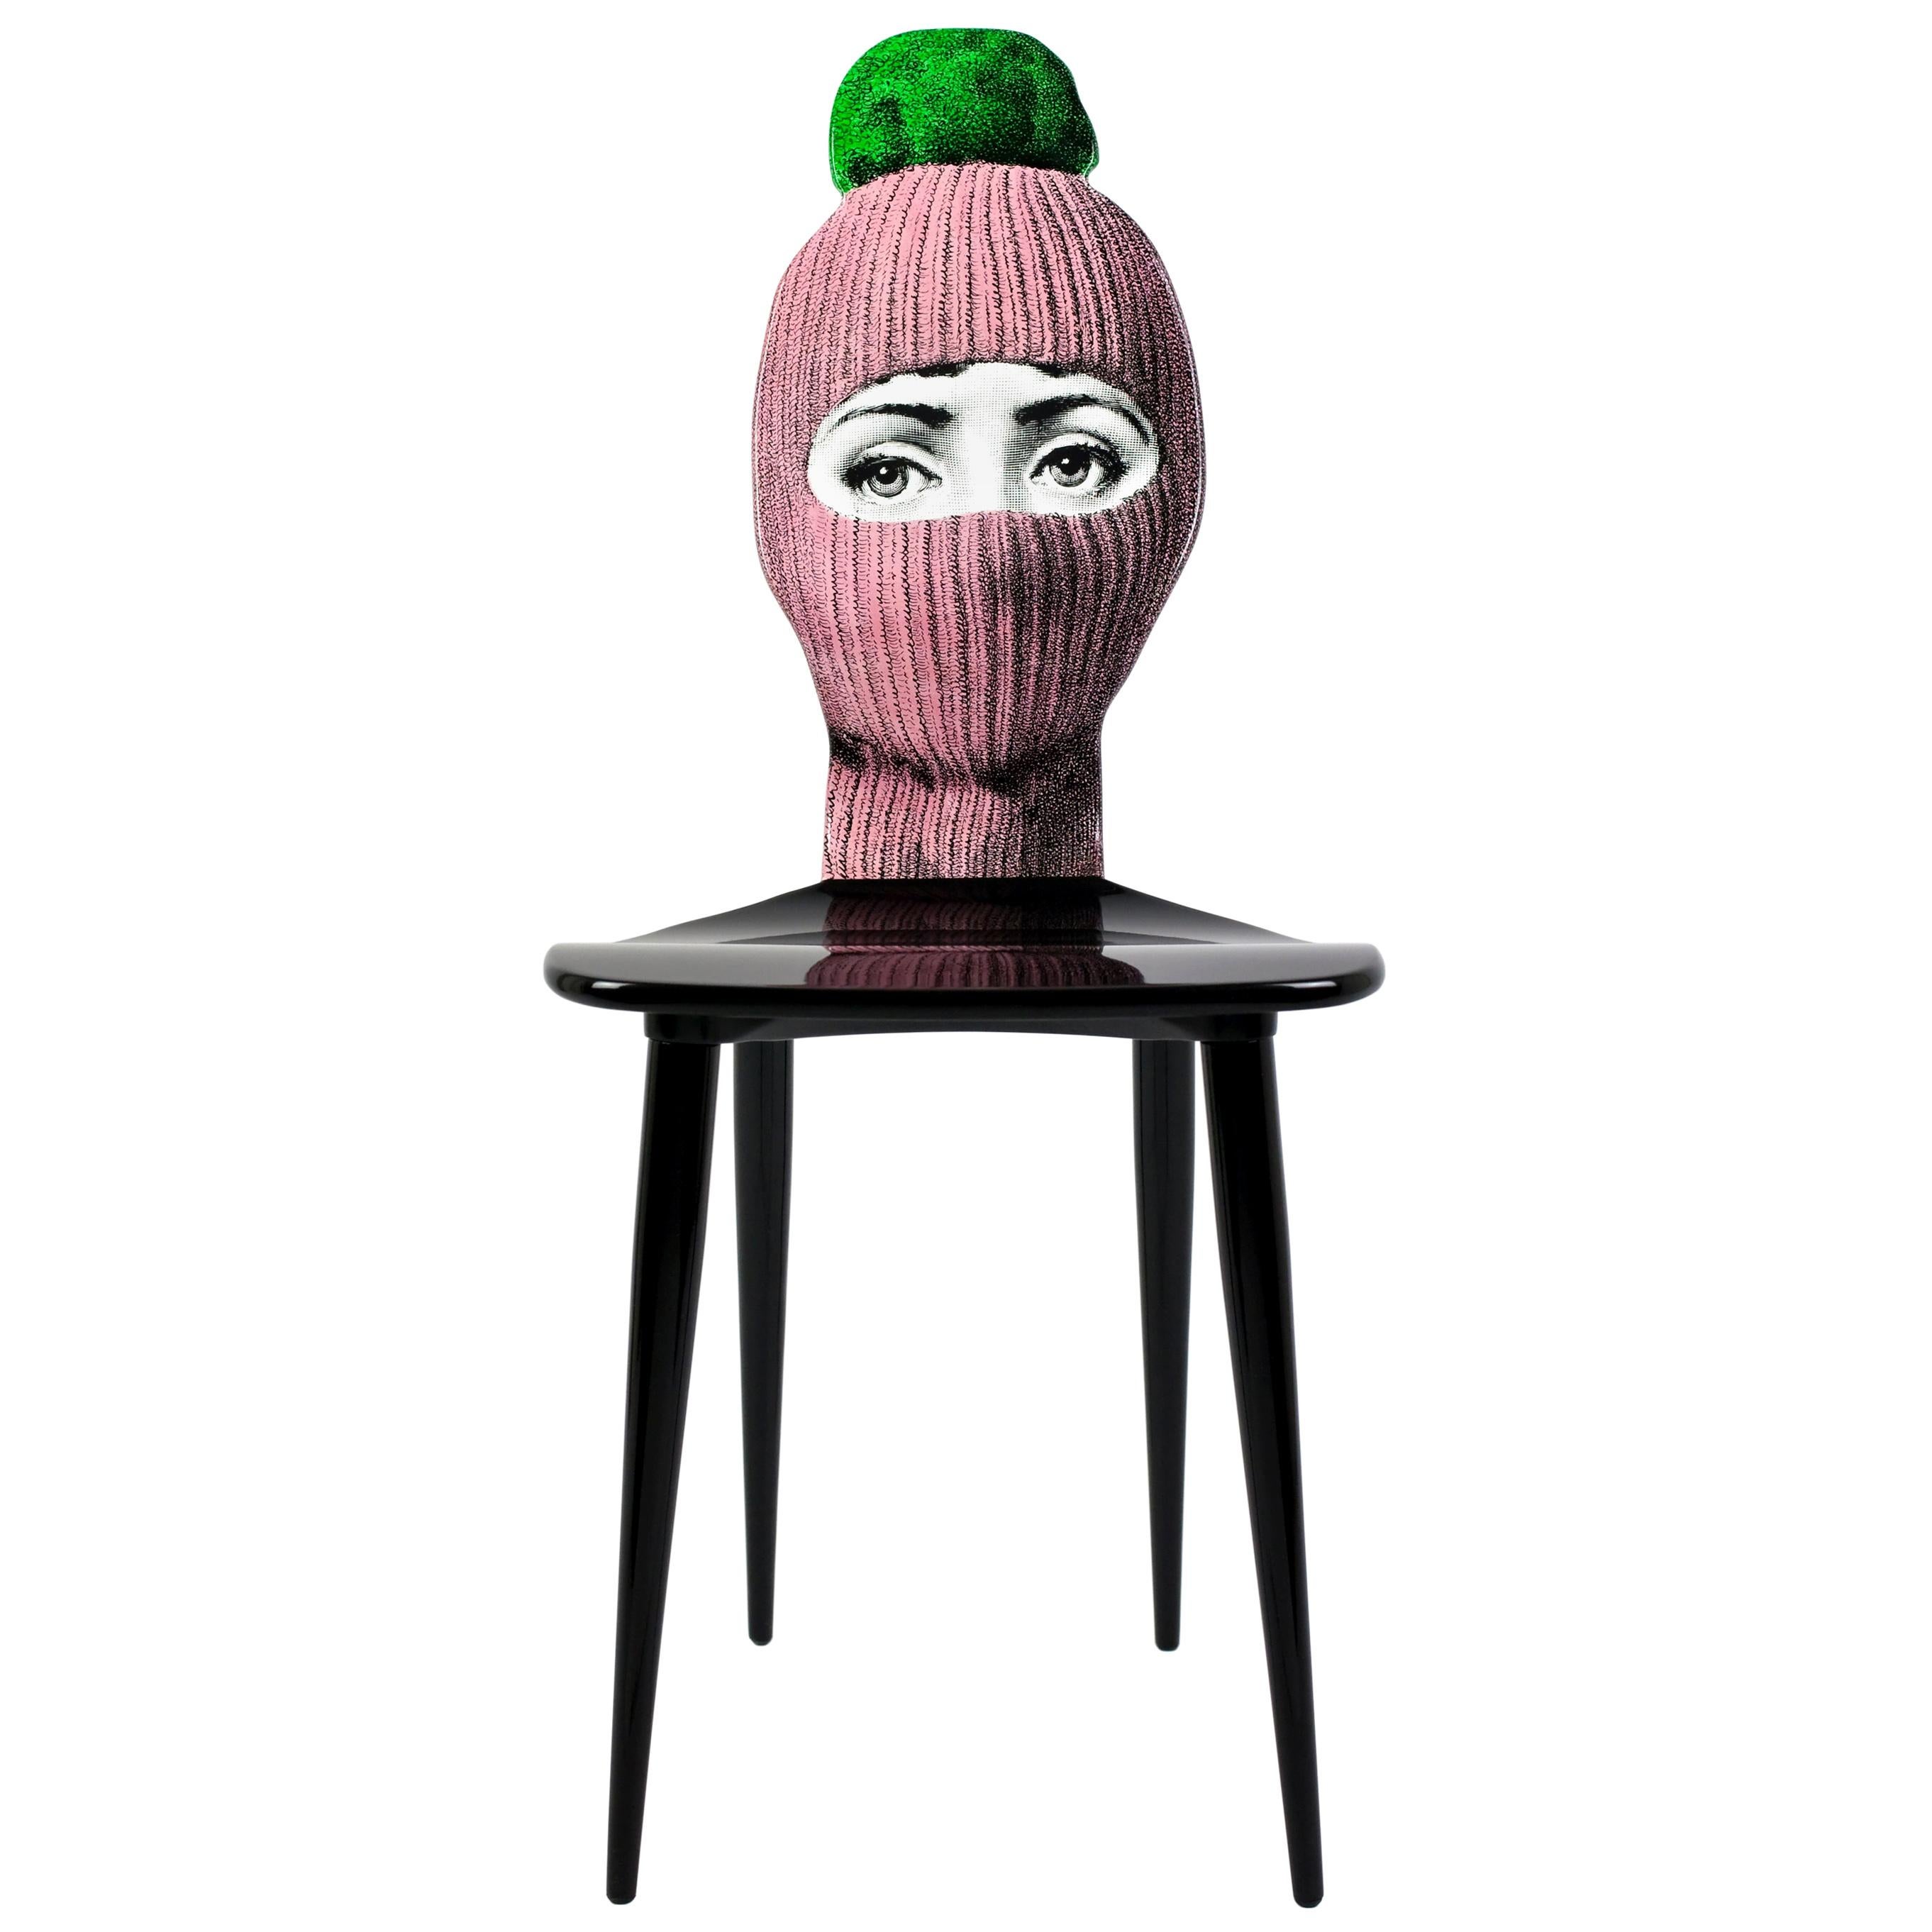 Fornasetti Chair Lux Gstaad Hand Painted Pink Ponpon Green Wood